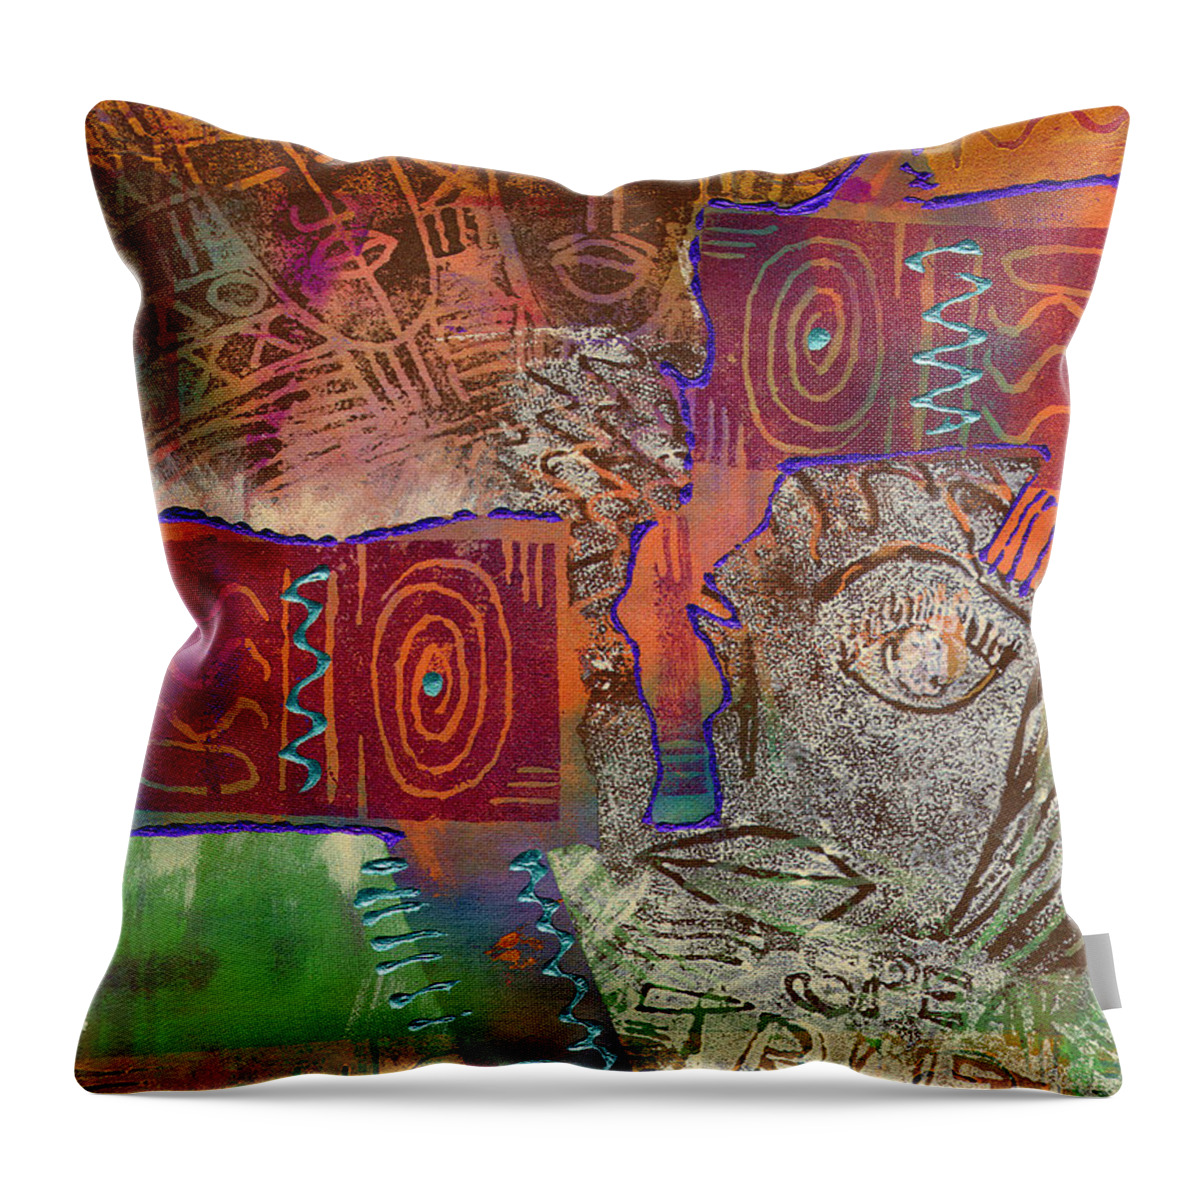 Woman Throw Pillow featuring the painting Golden Truth by Angela L Walker